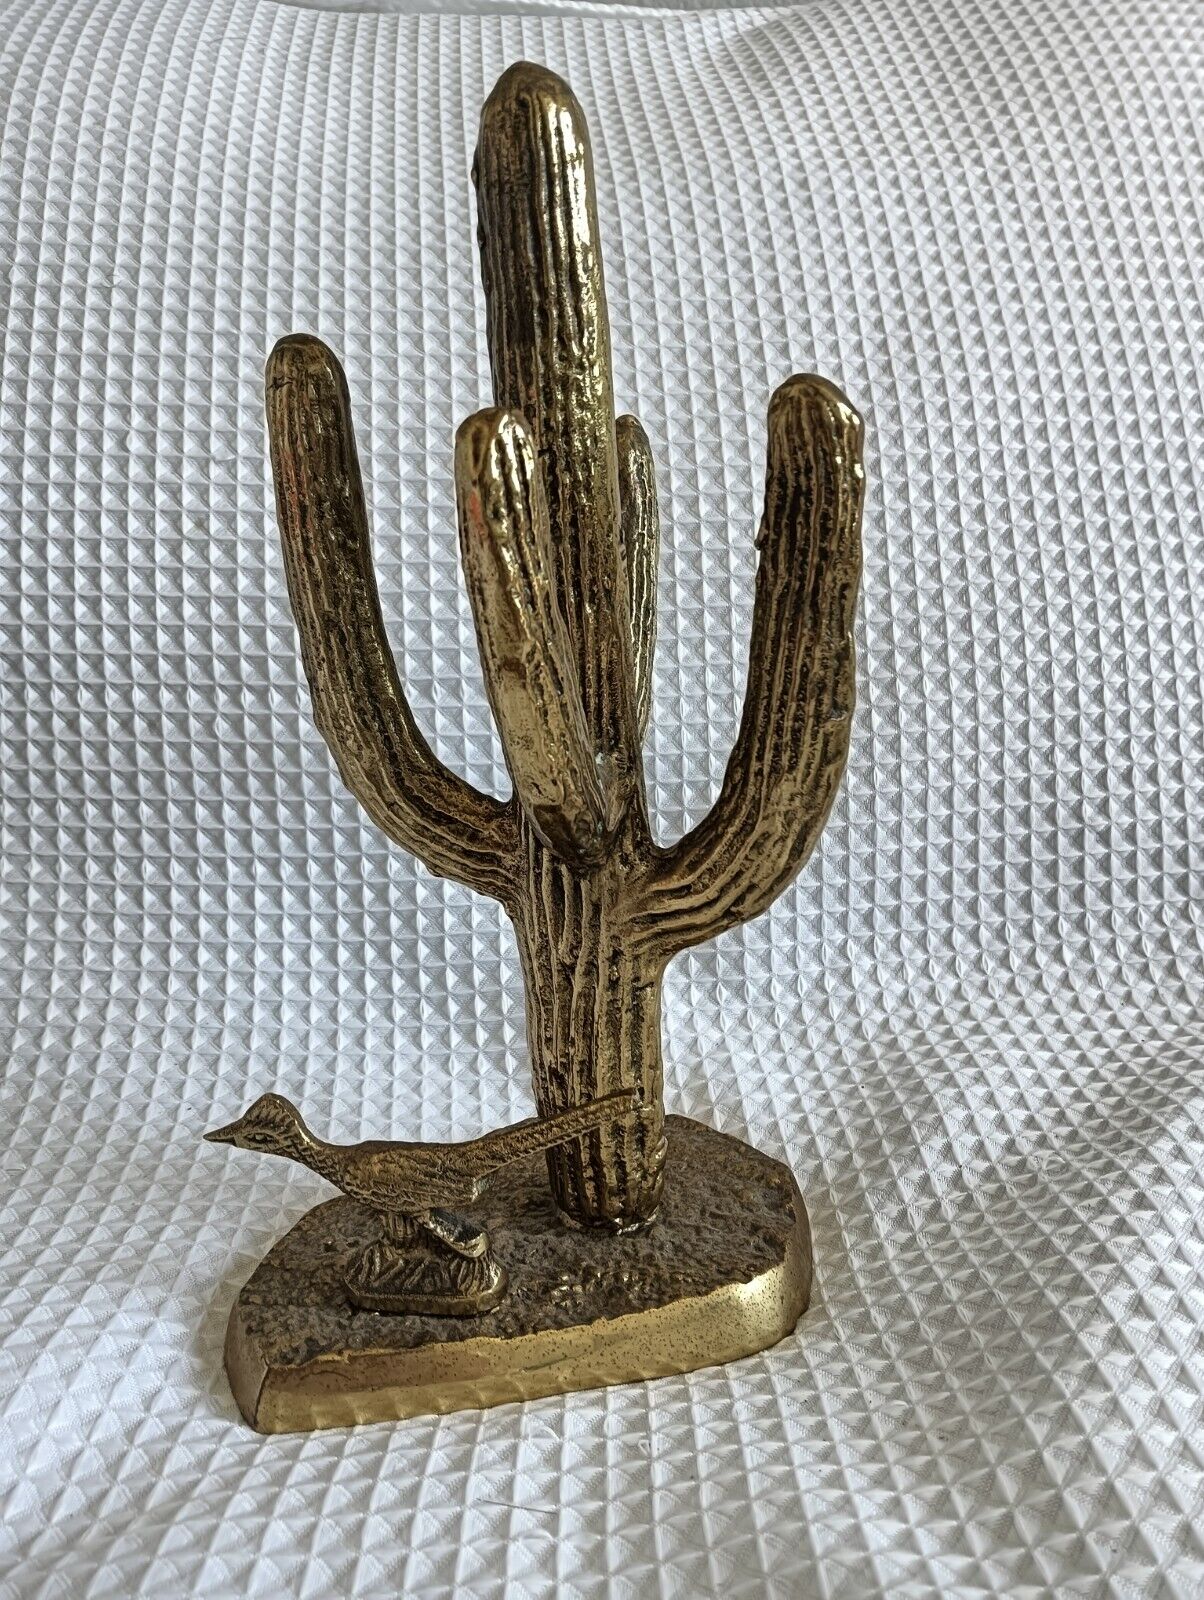 Vintage Brass Saguaro Cactus And Roadrunner Statue 10.5” tall collectible